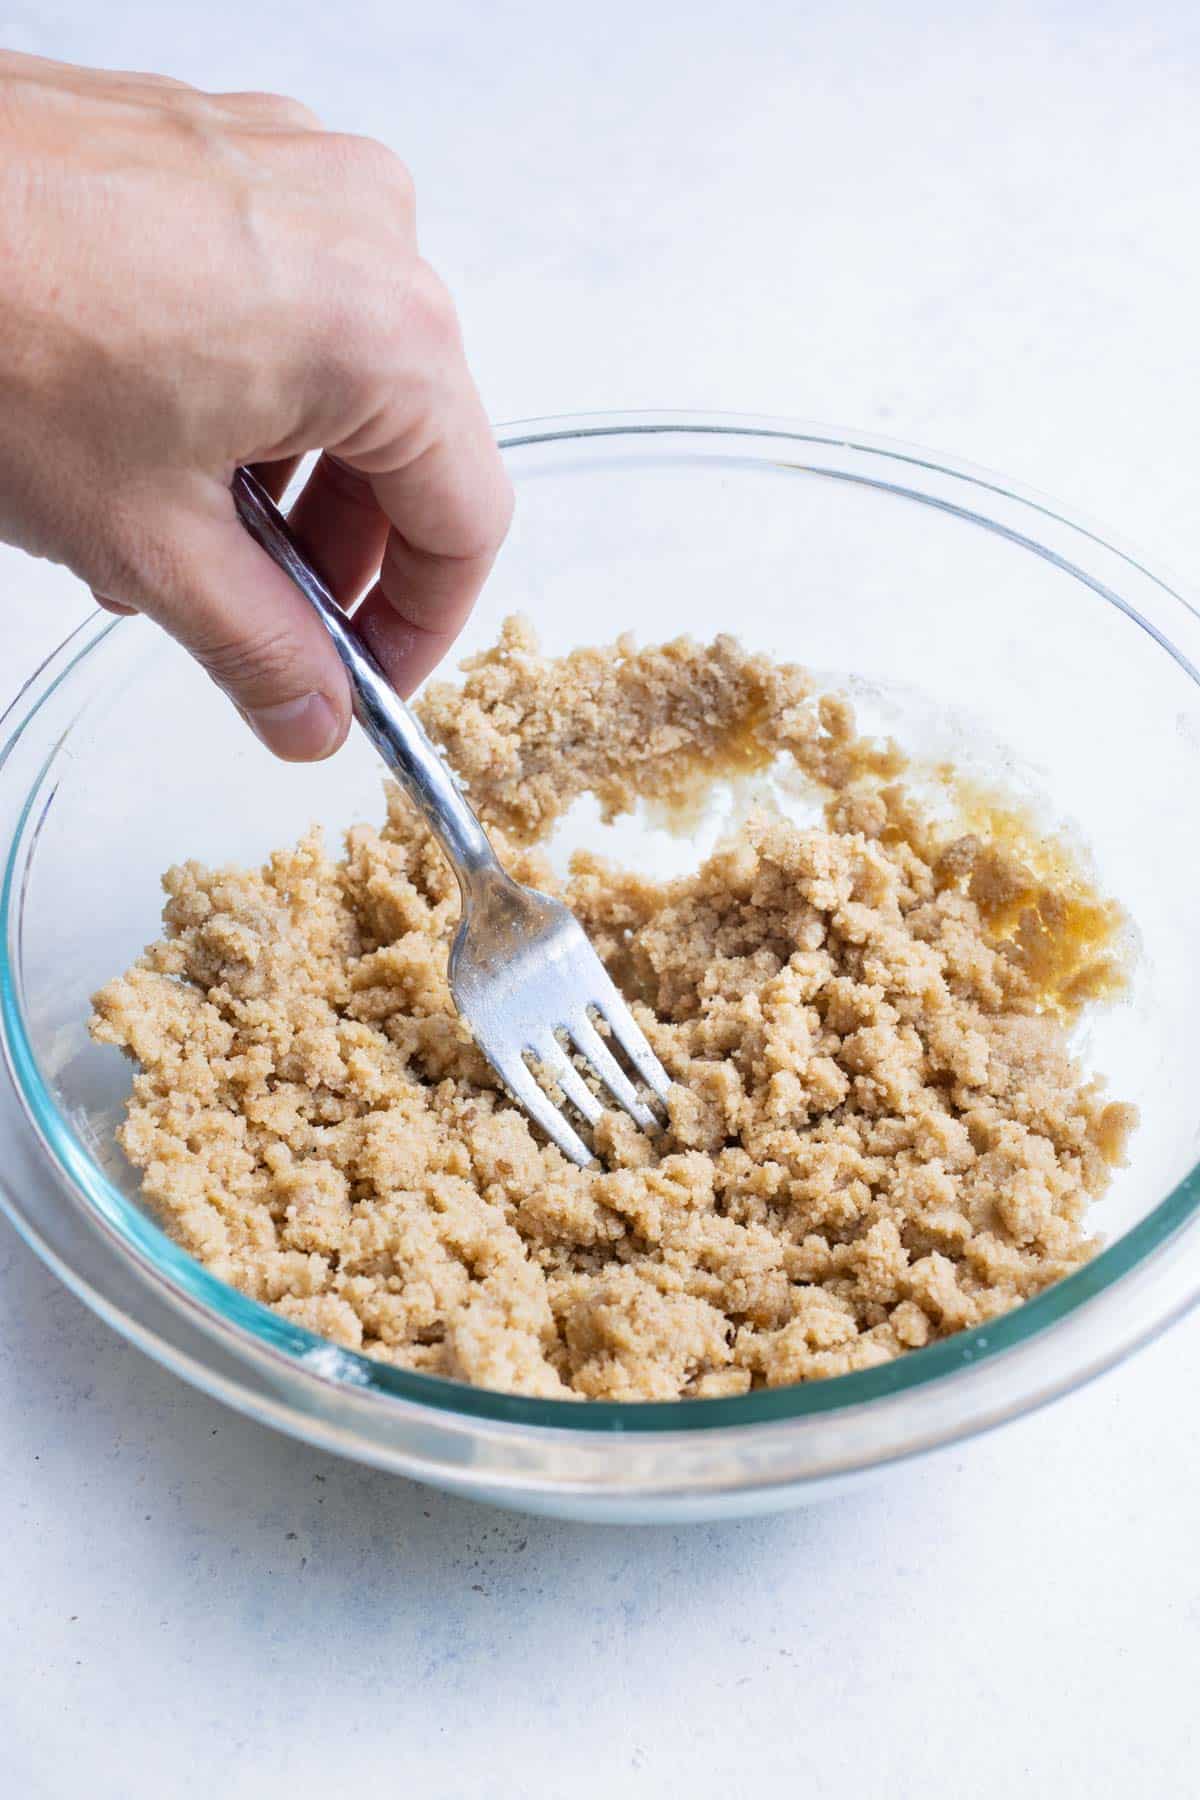 Butter, brown sugar, and seasonings are mixed with a fork.